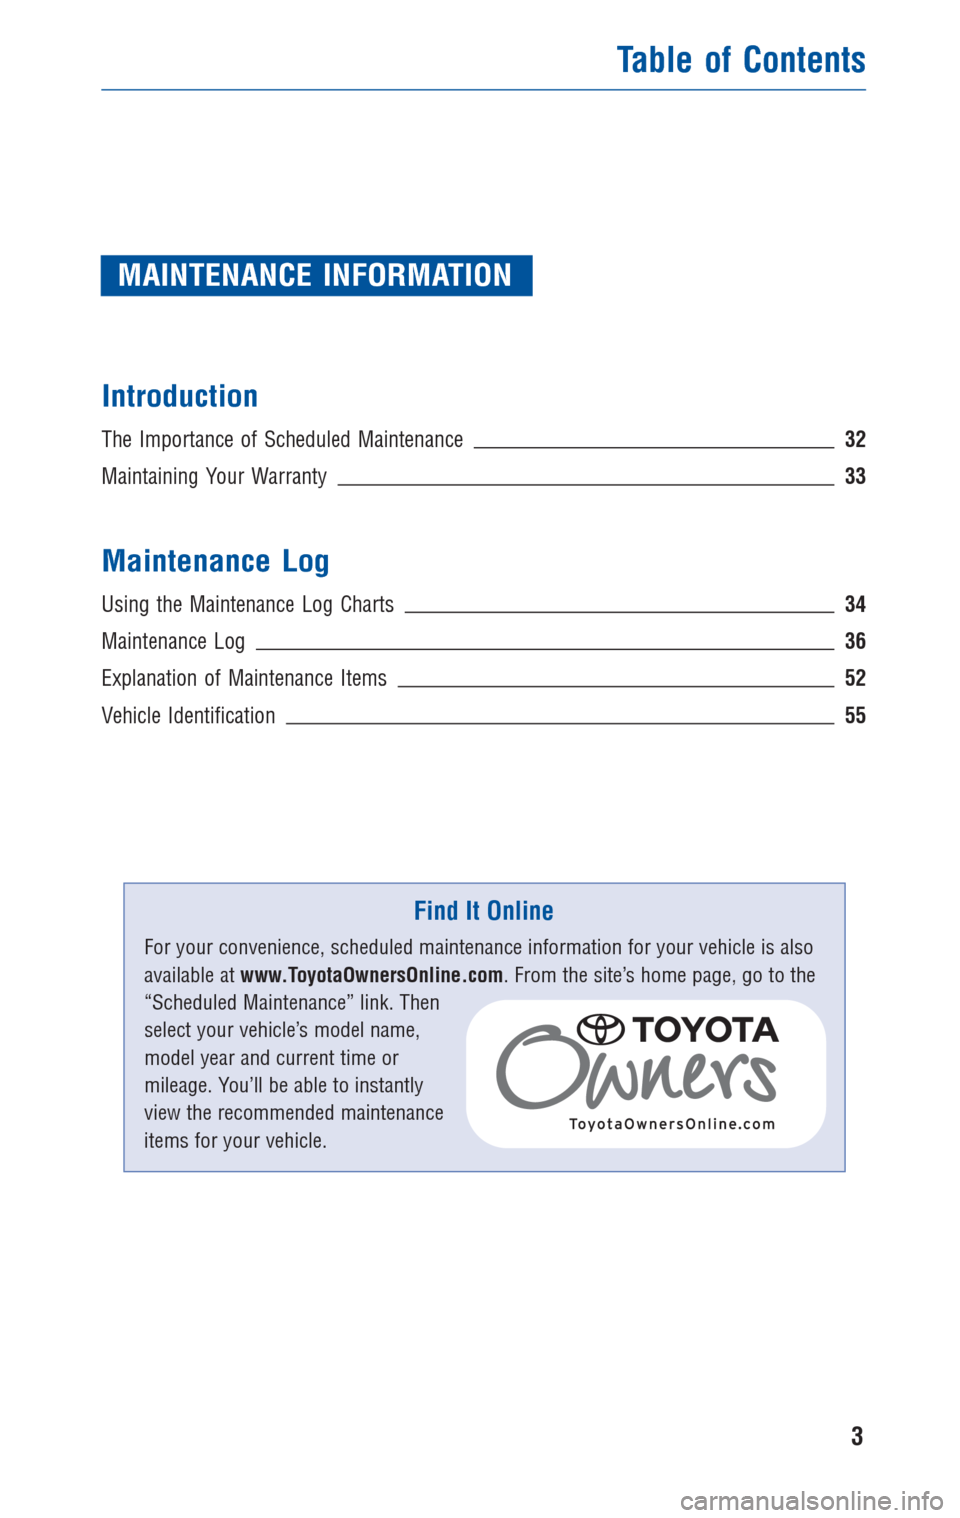 TOYOTA COROLLA 2010 10.G Warranty And Maintenance Guide MAINTENANCE INFORMATION
Introduction
The Importance of Scheduled Maintenance32
Maintaining Your Warranty33
Maintenance Log
Using the Maintenance Log Charts34
Maintenance Log36
Explanation of Maintenan